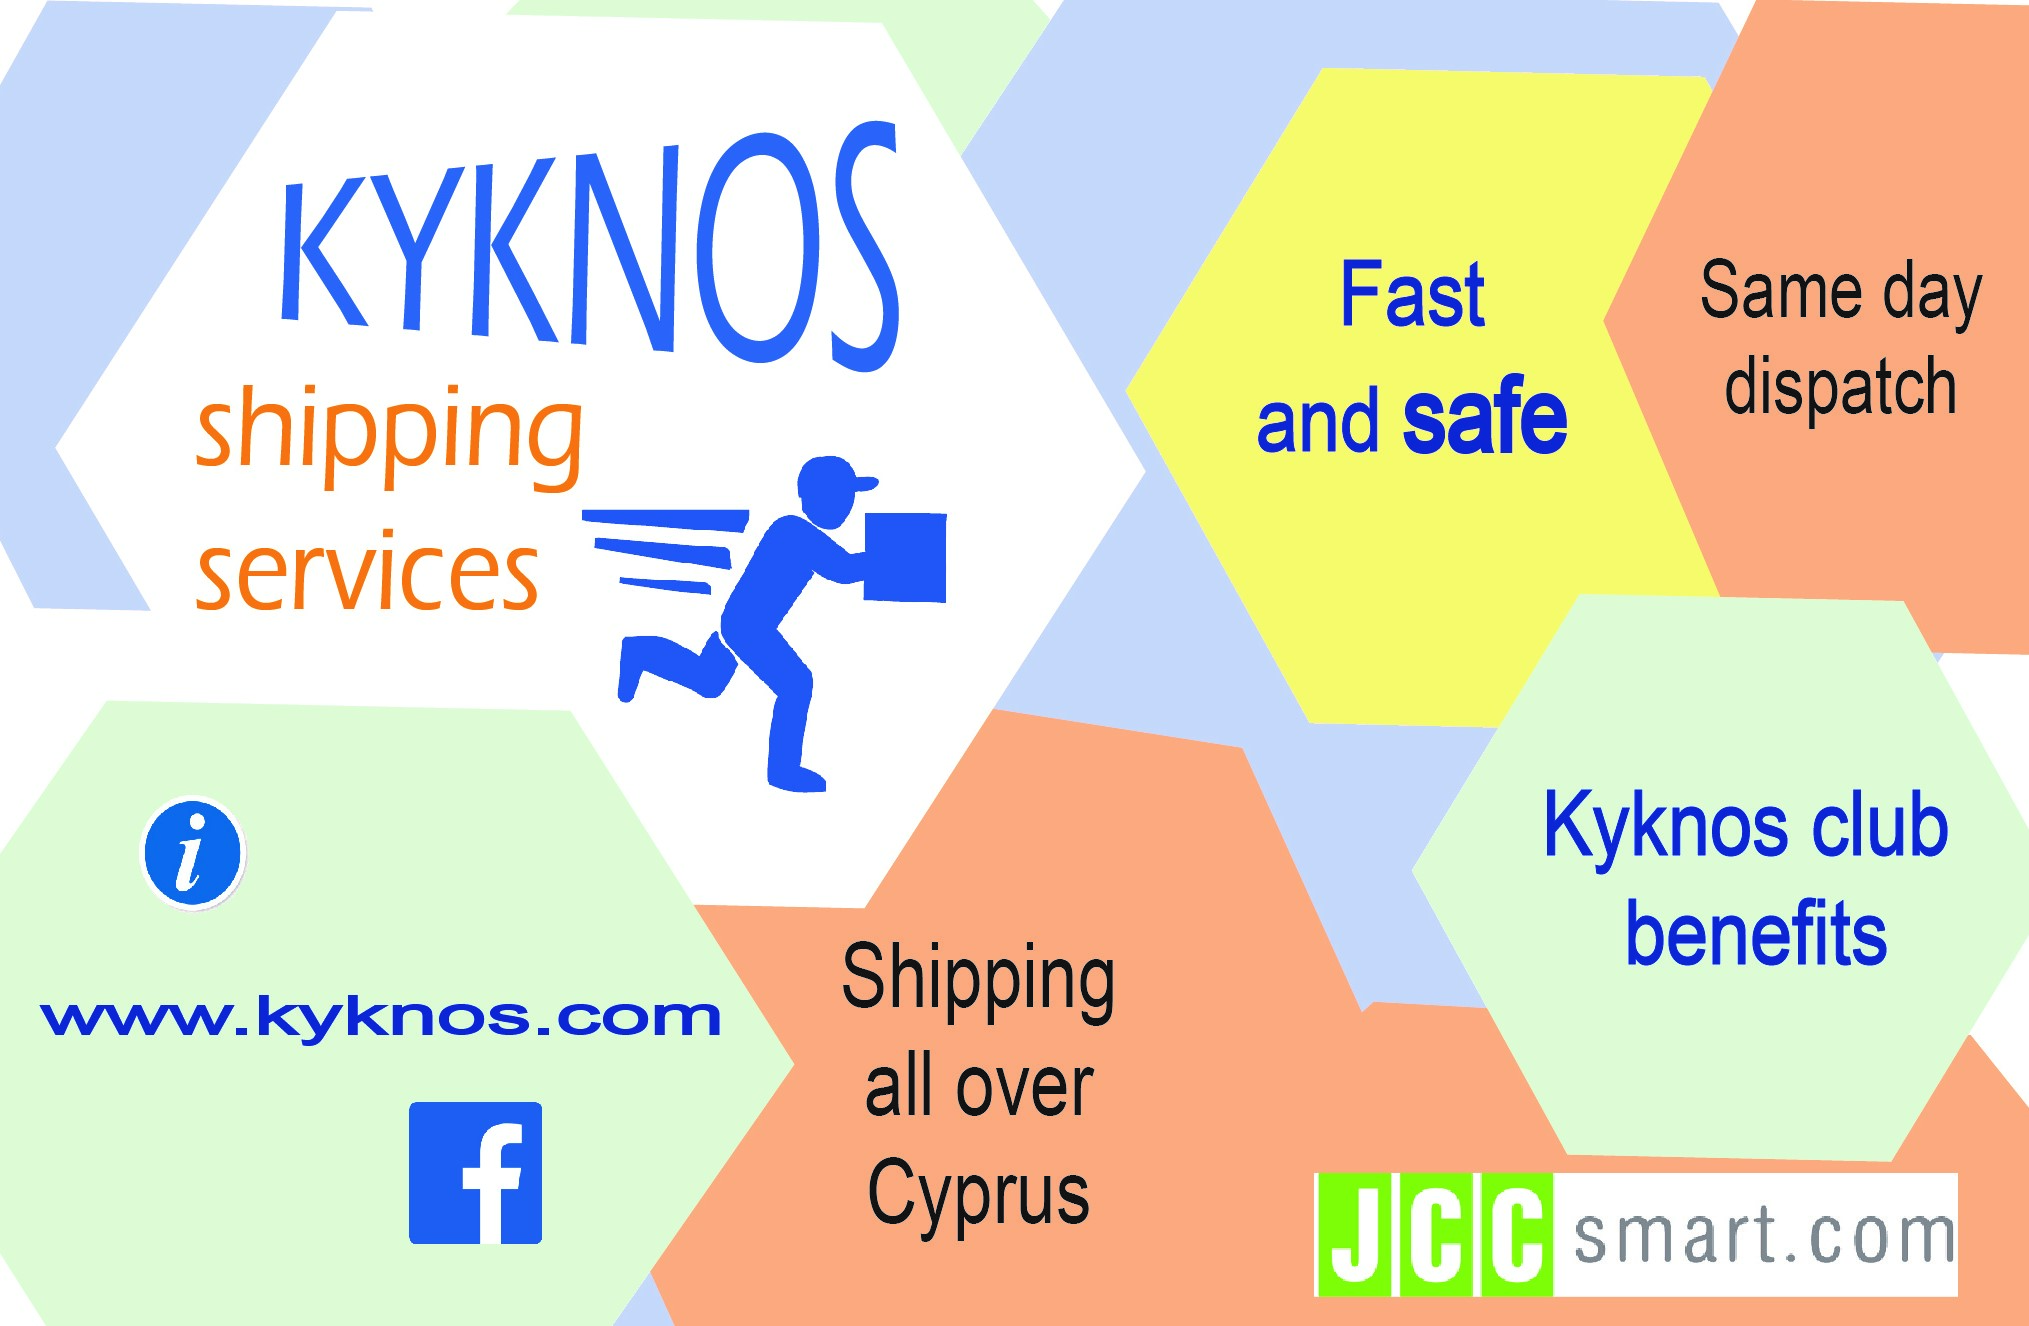 We send products all over Cyprus